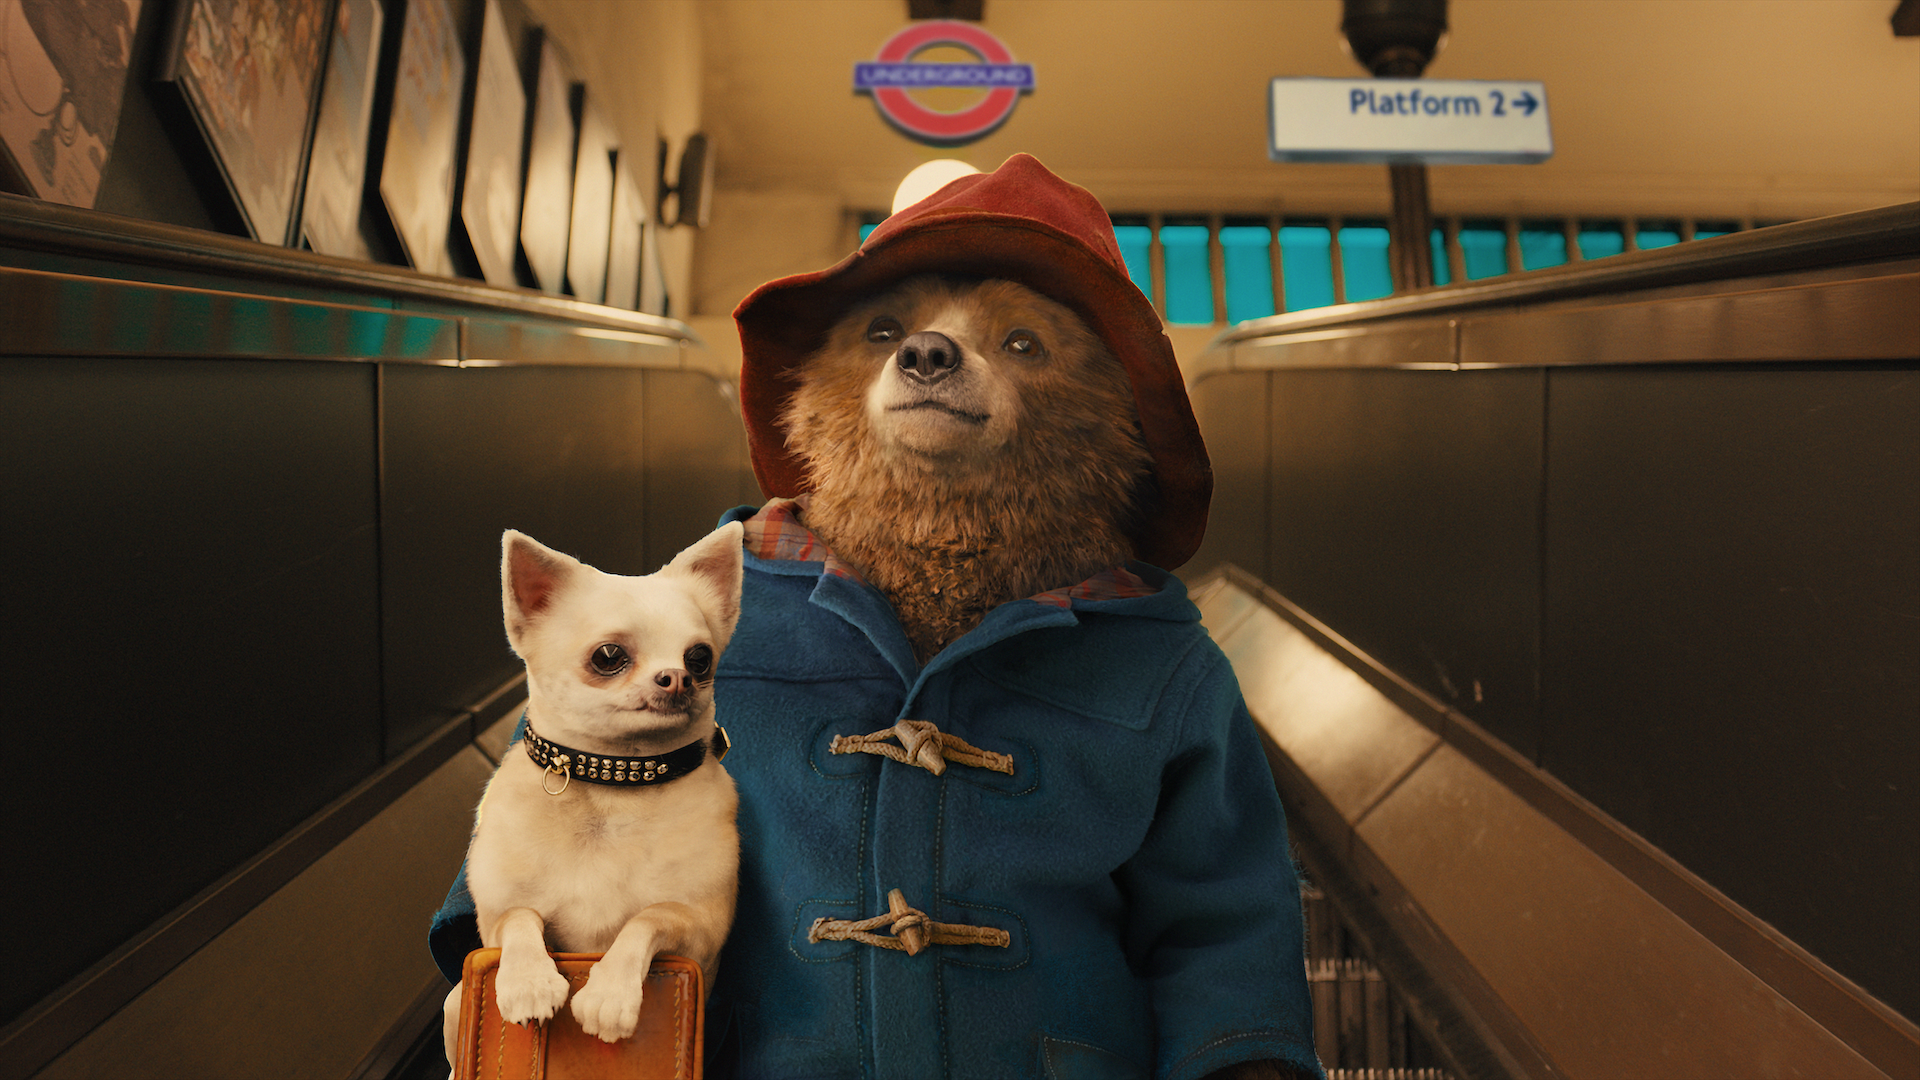 a-massive-interactive-paddington-bear-experience-is-opening-in-central-london-this-year